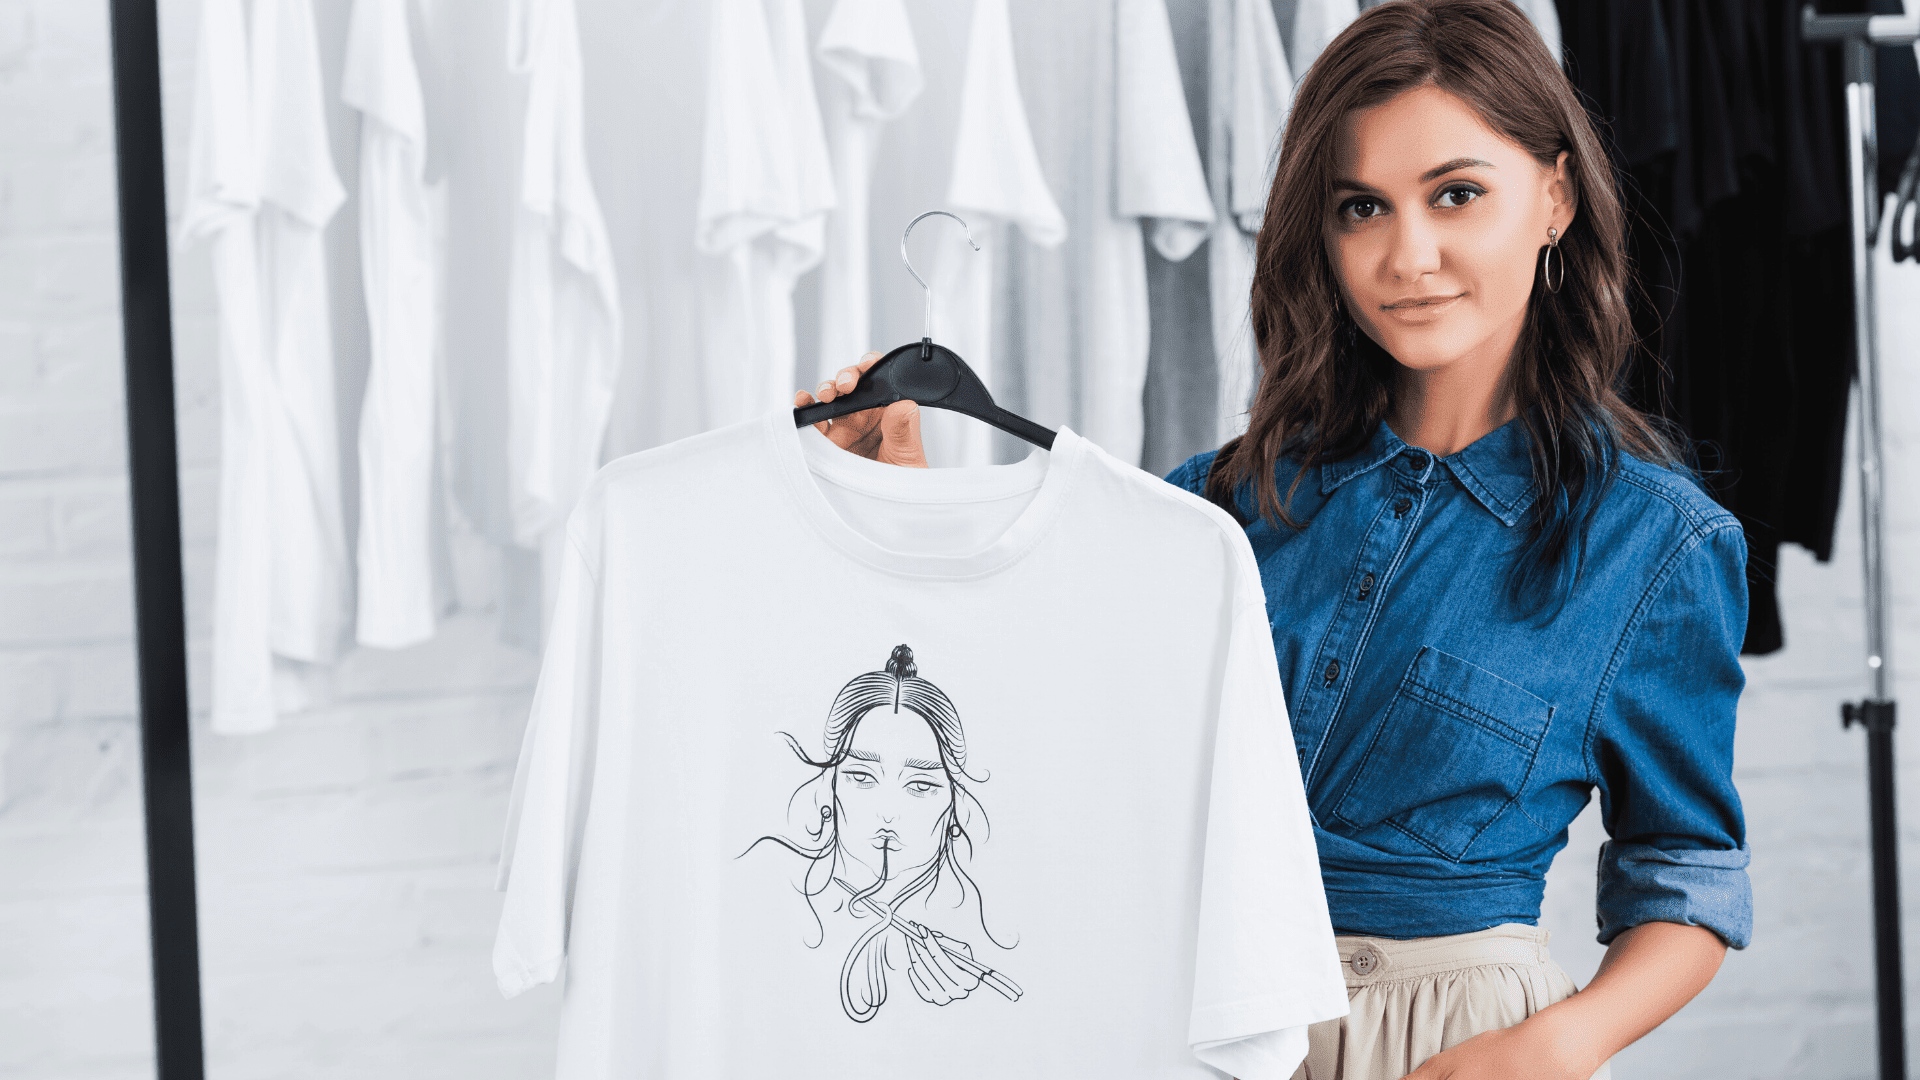 How To Design A T Shirt From Scratch